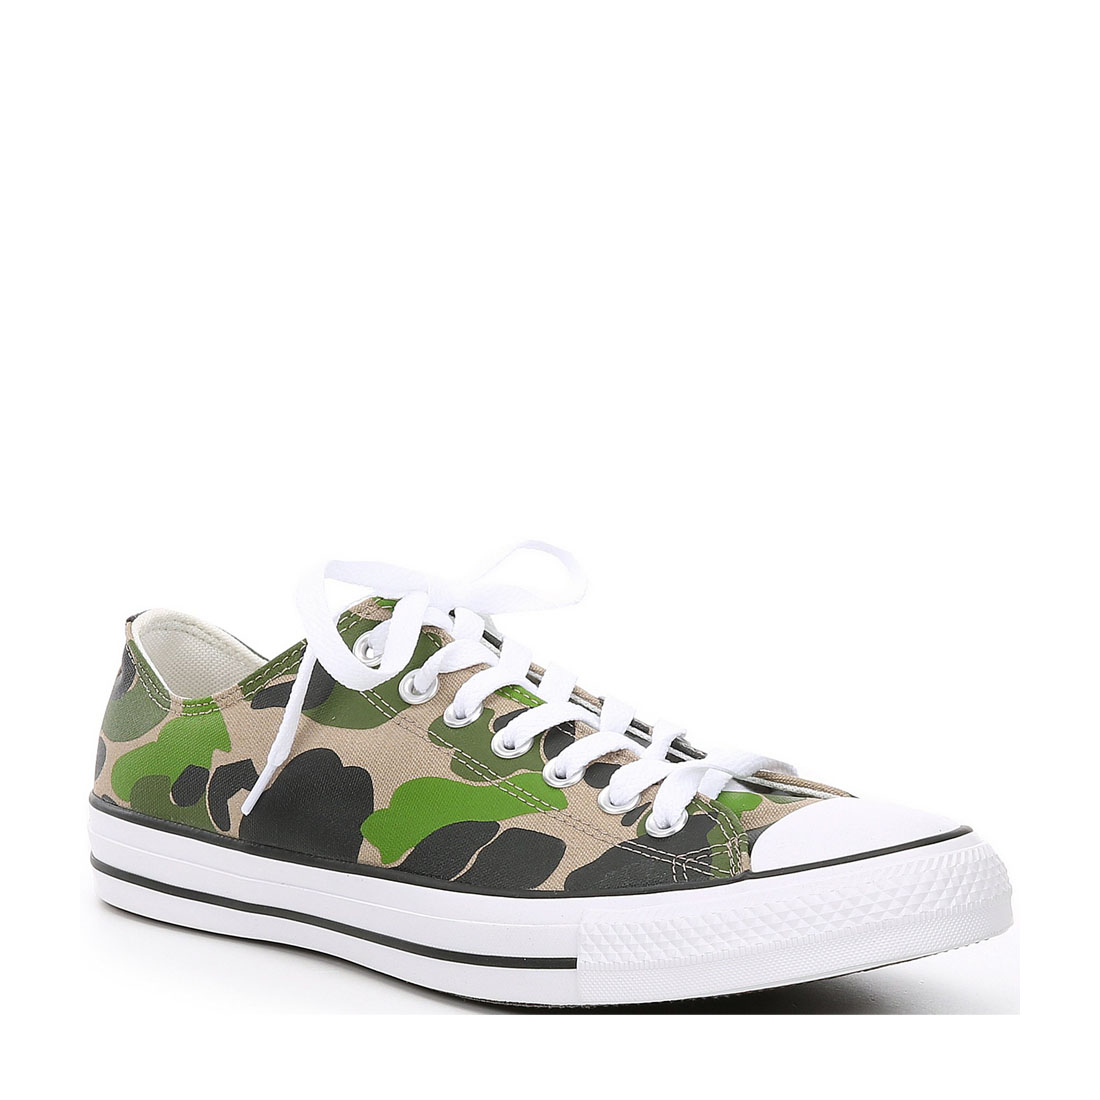 Converse Chuck Taylor All Star Low Men/Adult shoe size Men 8.5 Casual 166715F Black | Candied Ginger - image 1 of 1